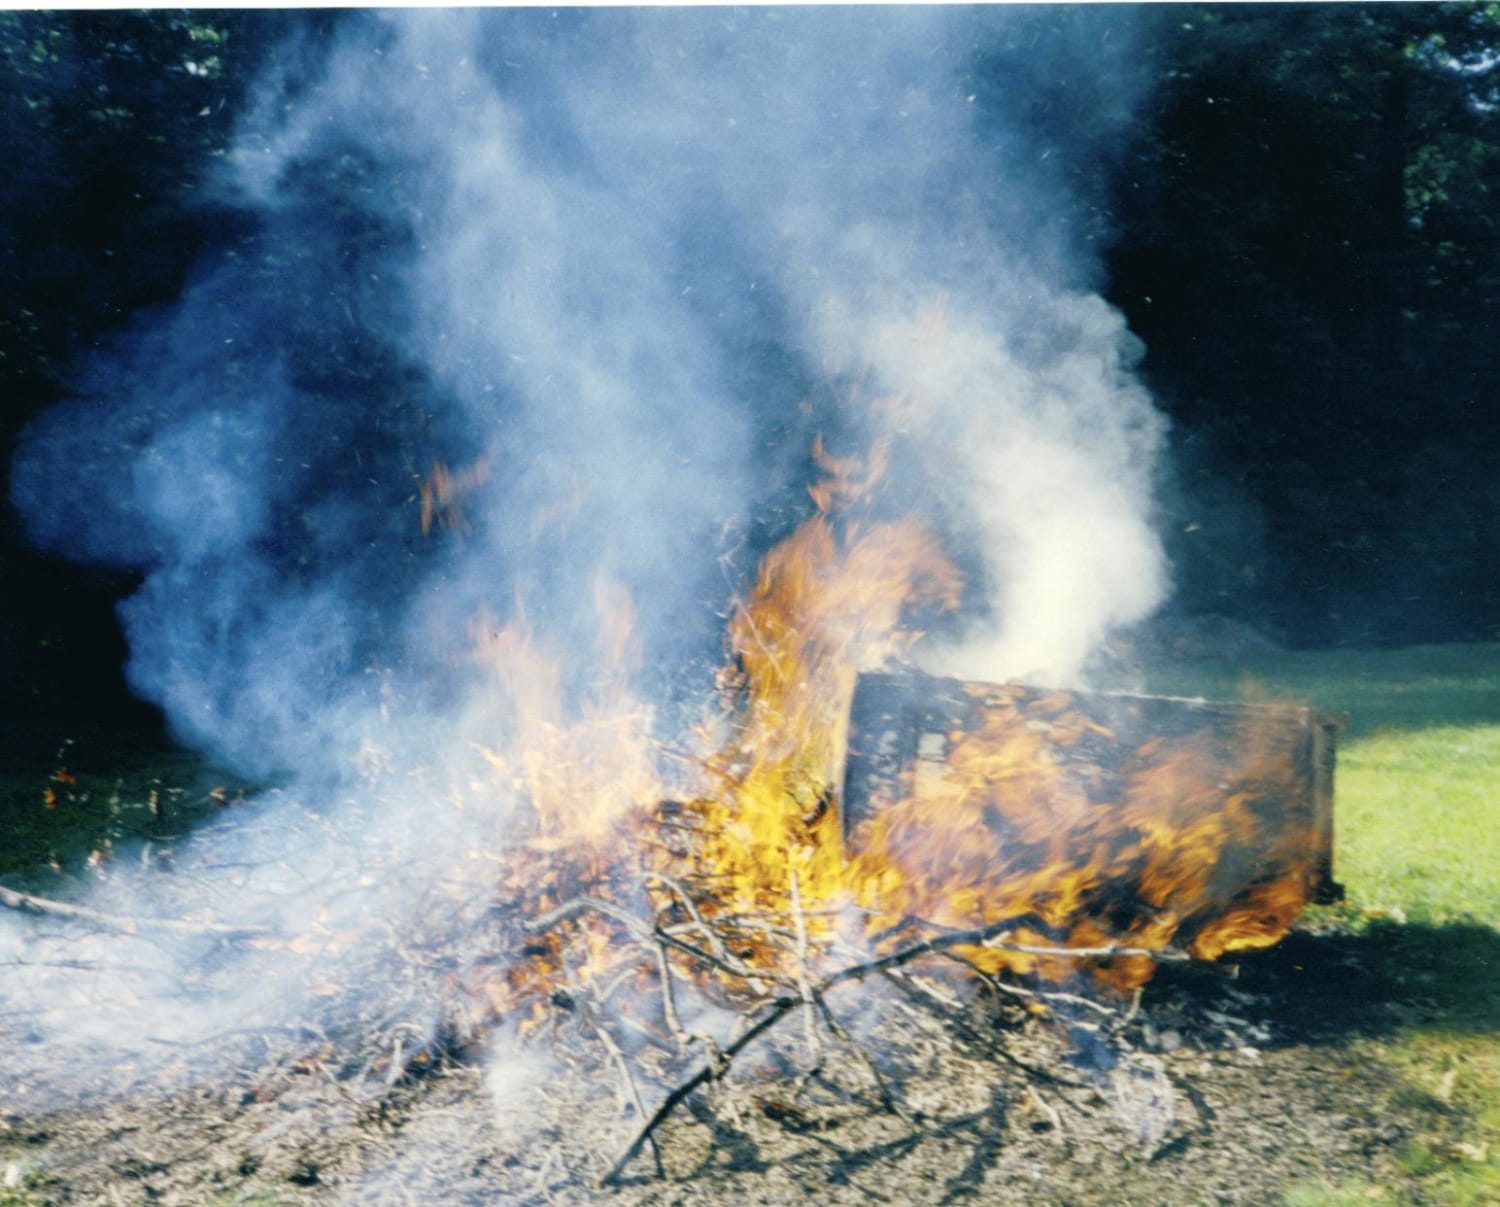 My grandma took this picture in 1985. A bunch of people see a bunch of different things. Some see a devil, some see an Indian, a lion and skulls. This was a random brush fire that happened in her yard.